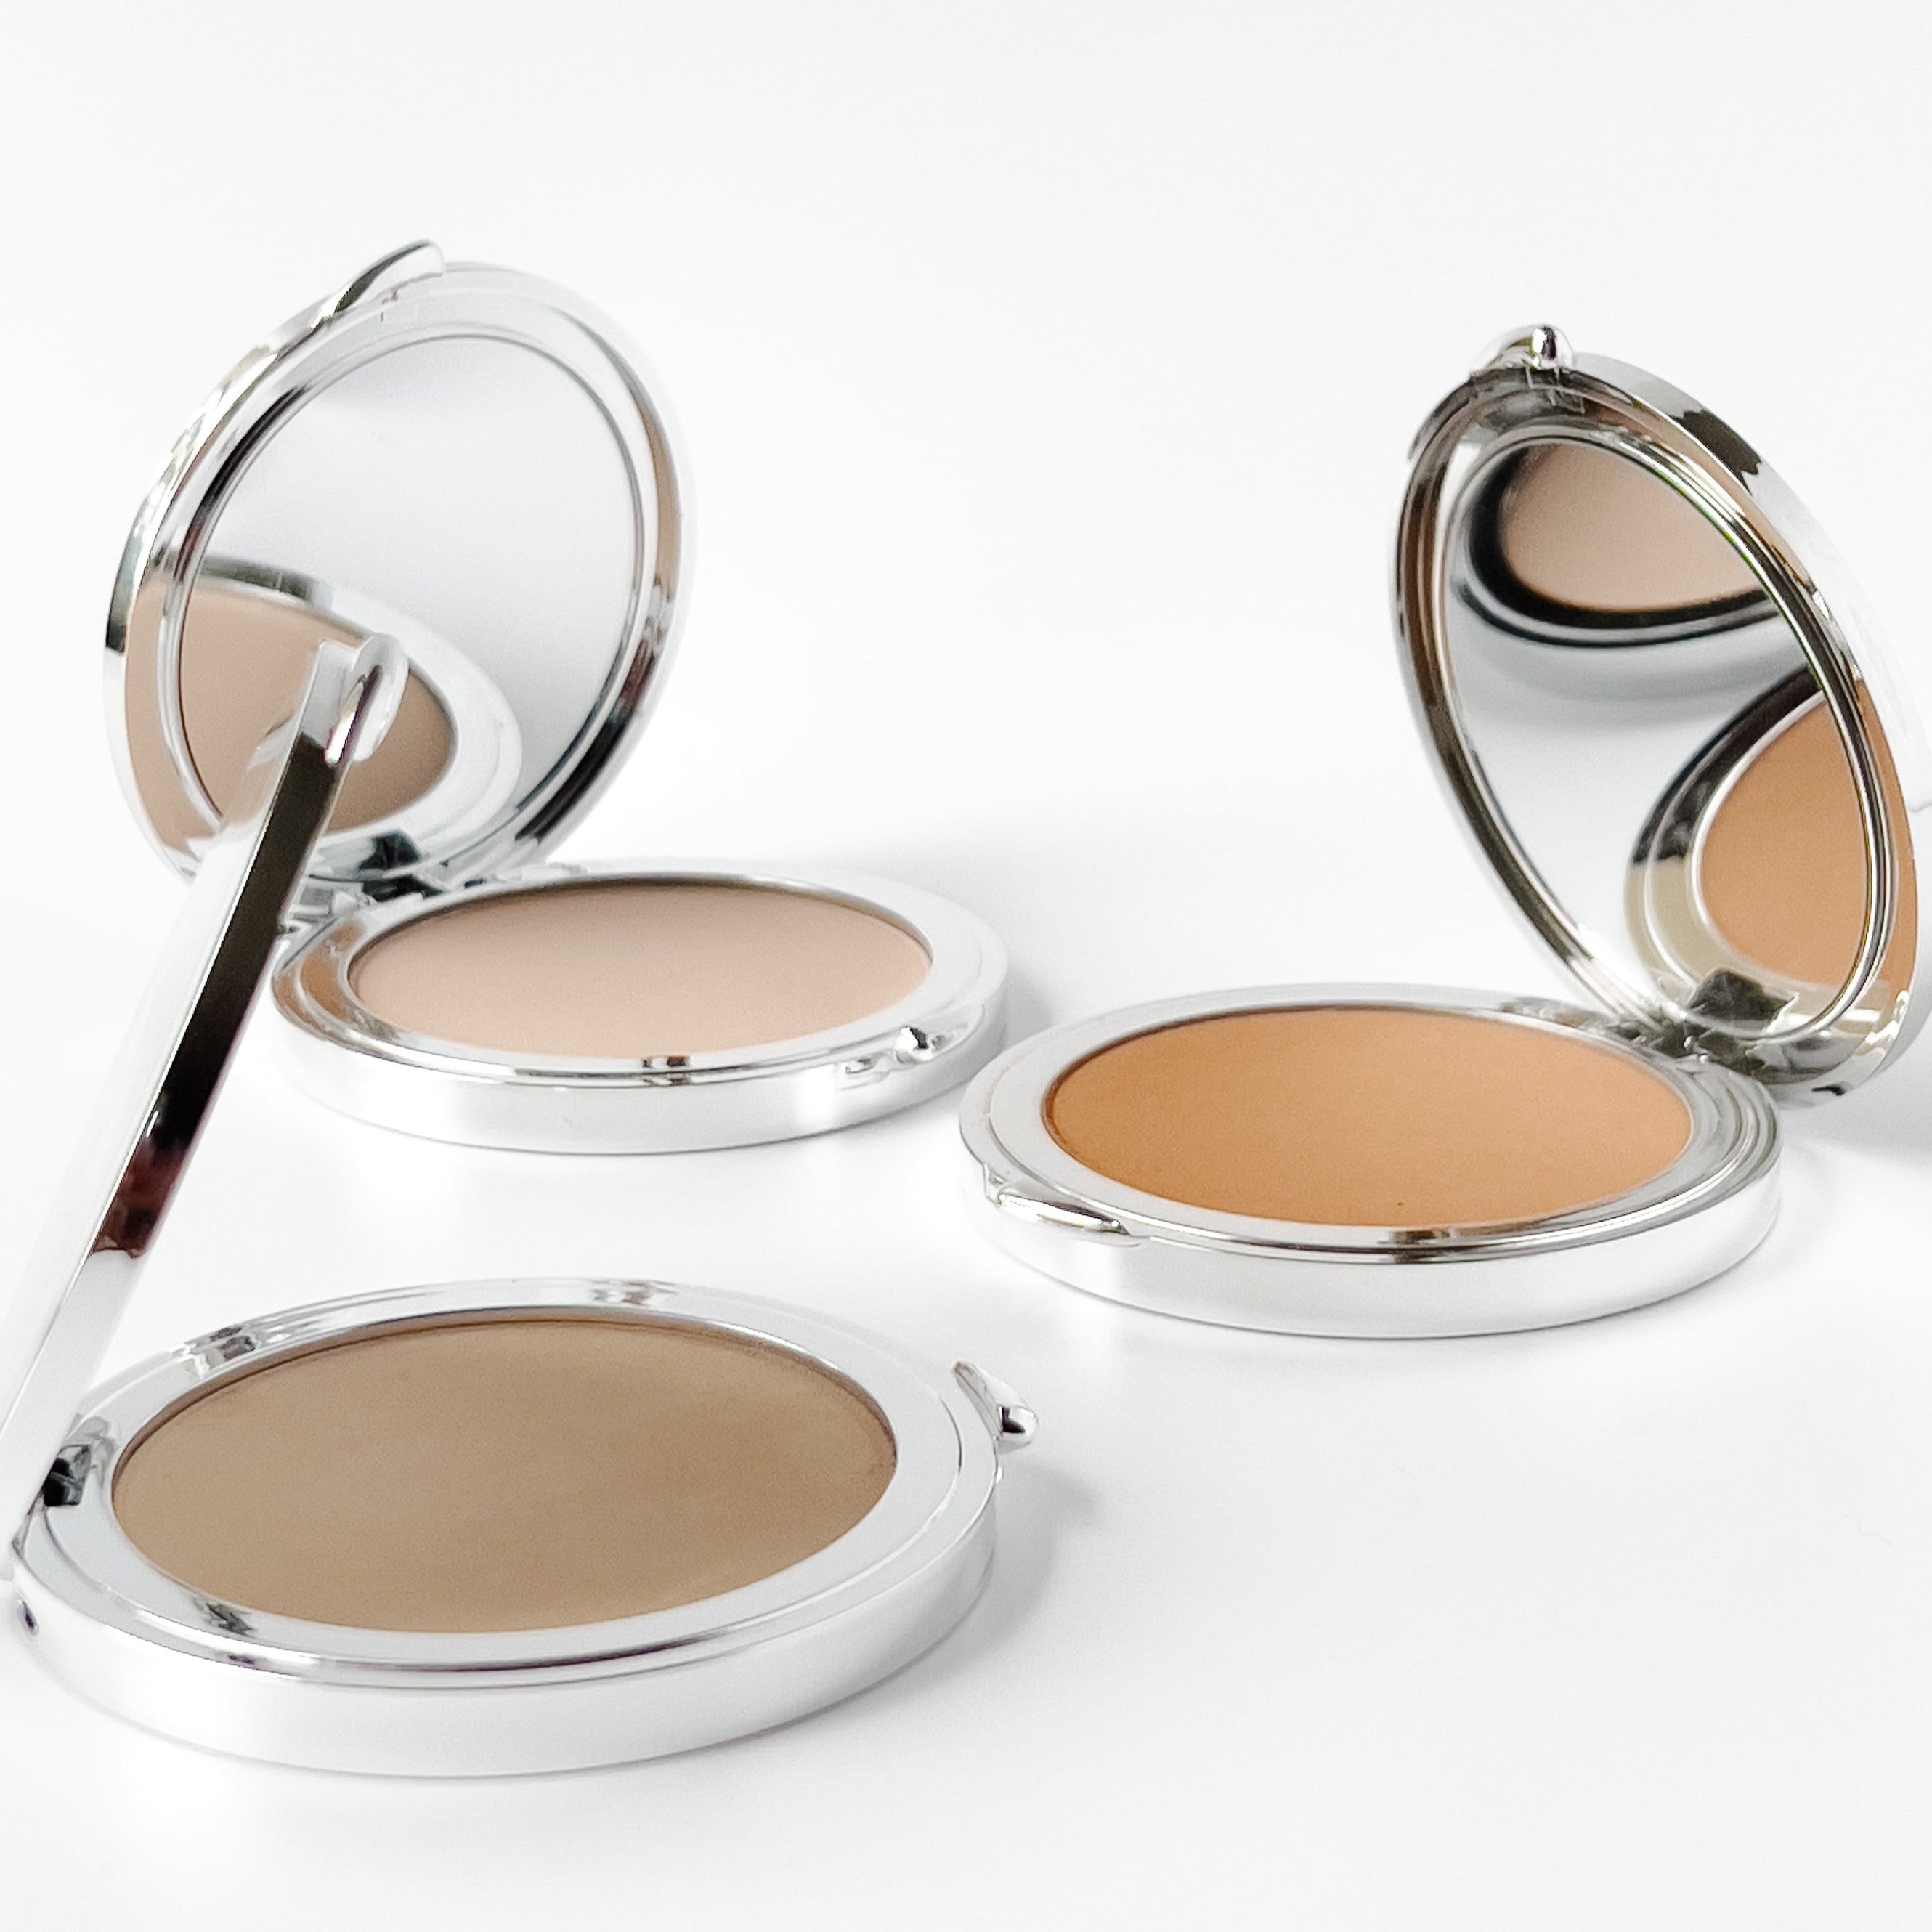 Compressed Mineral Foundation | 10g